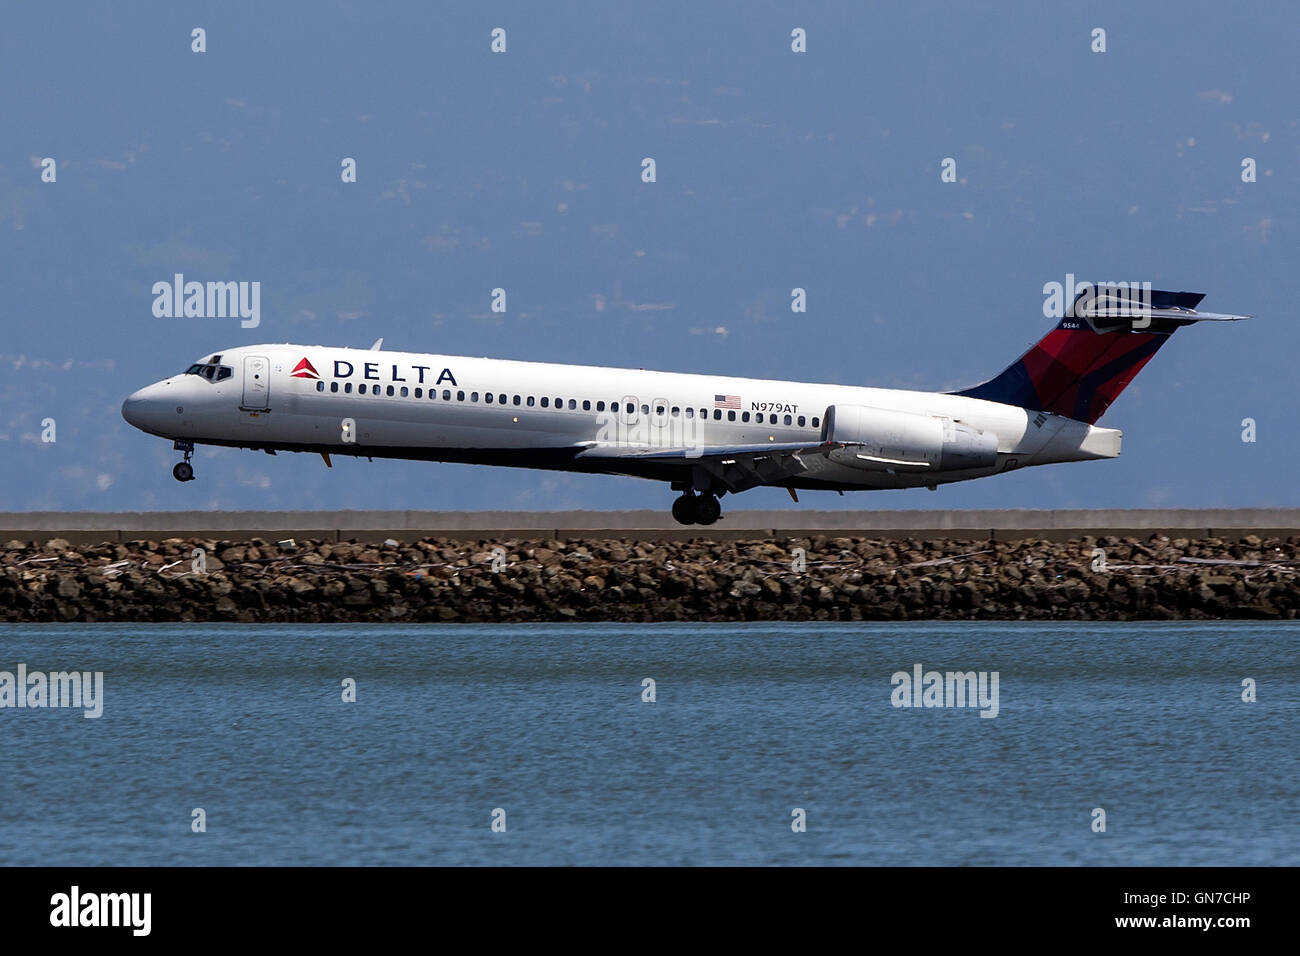 Delta Boeing 717-200 (N979AT) lands at San Francisco International Airport (SFO), Millbrae, California, United States of America Stock Photo